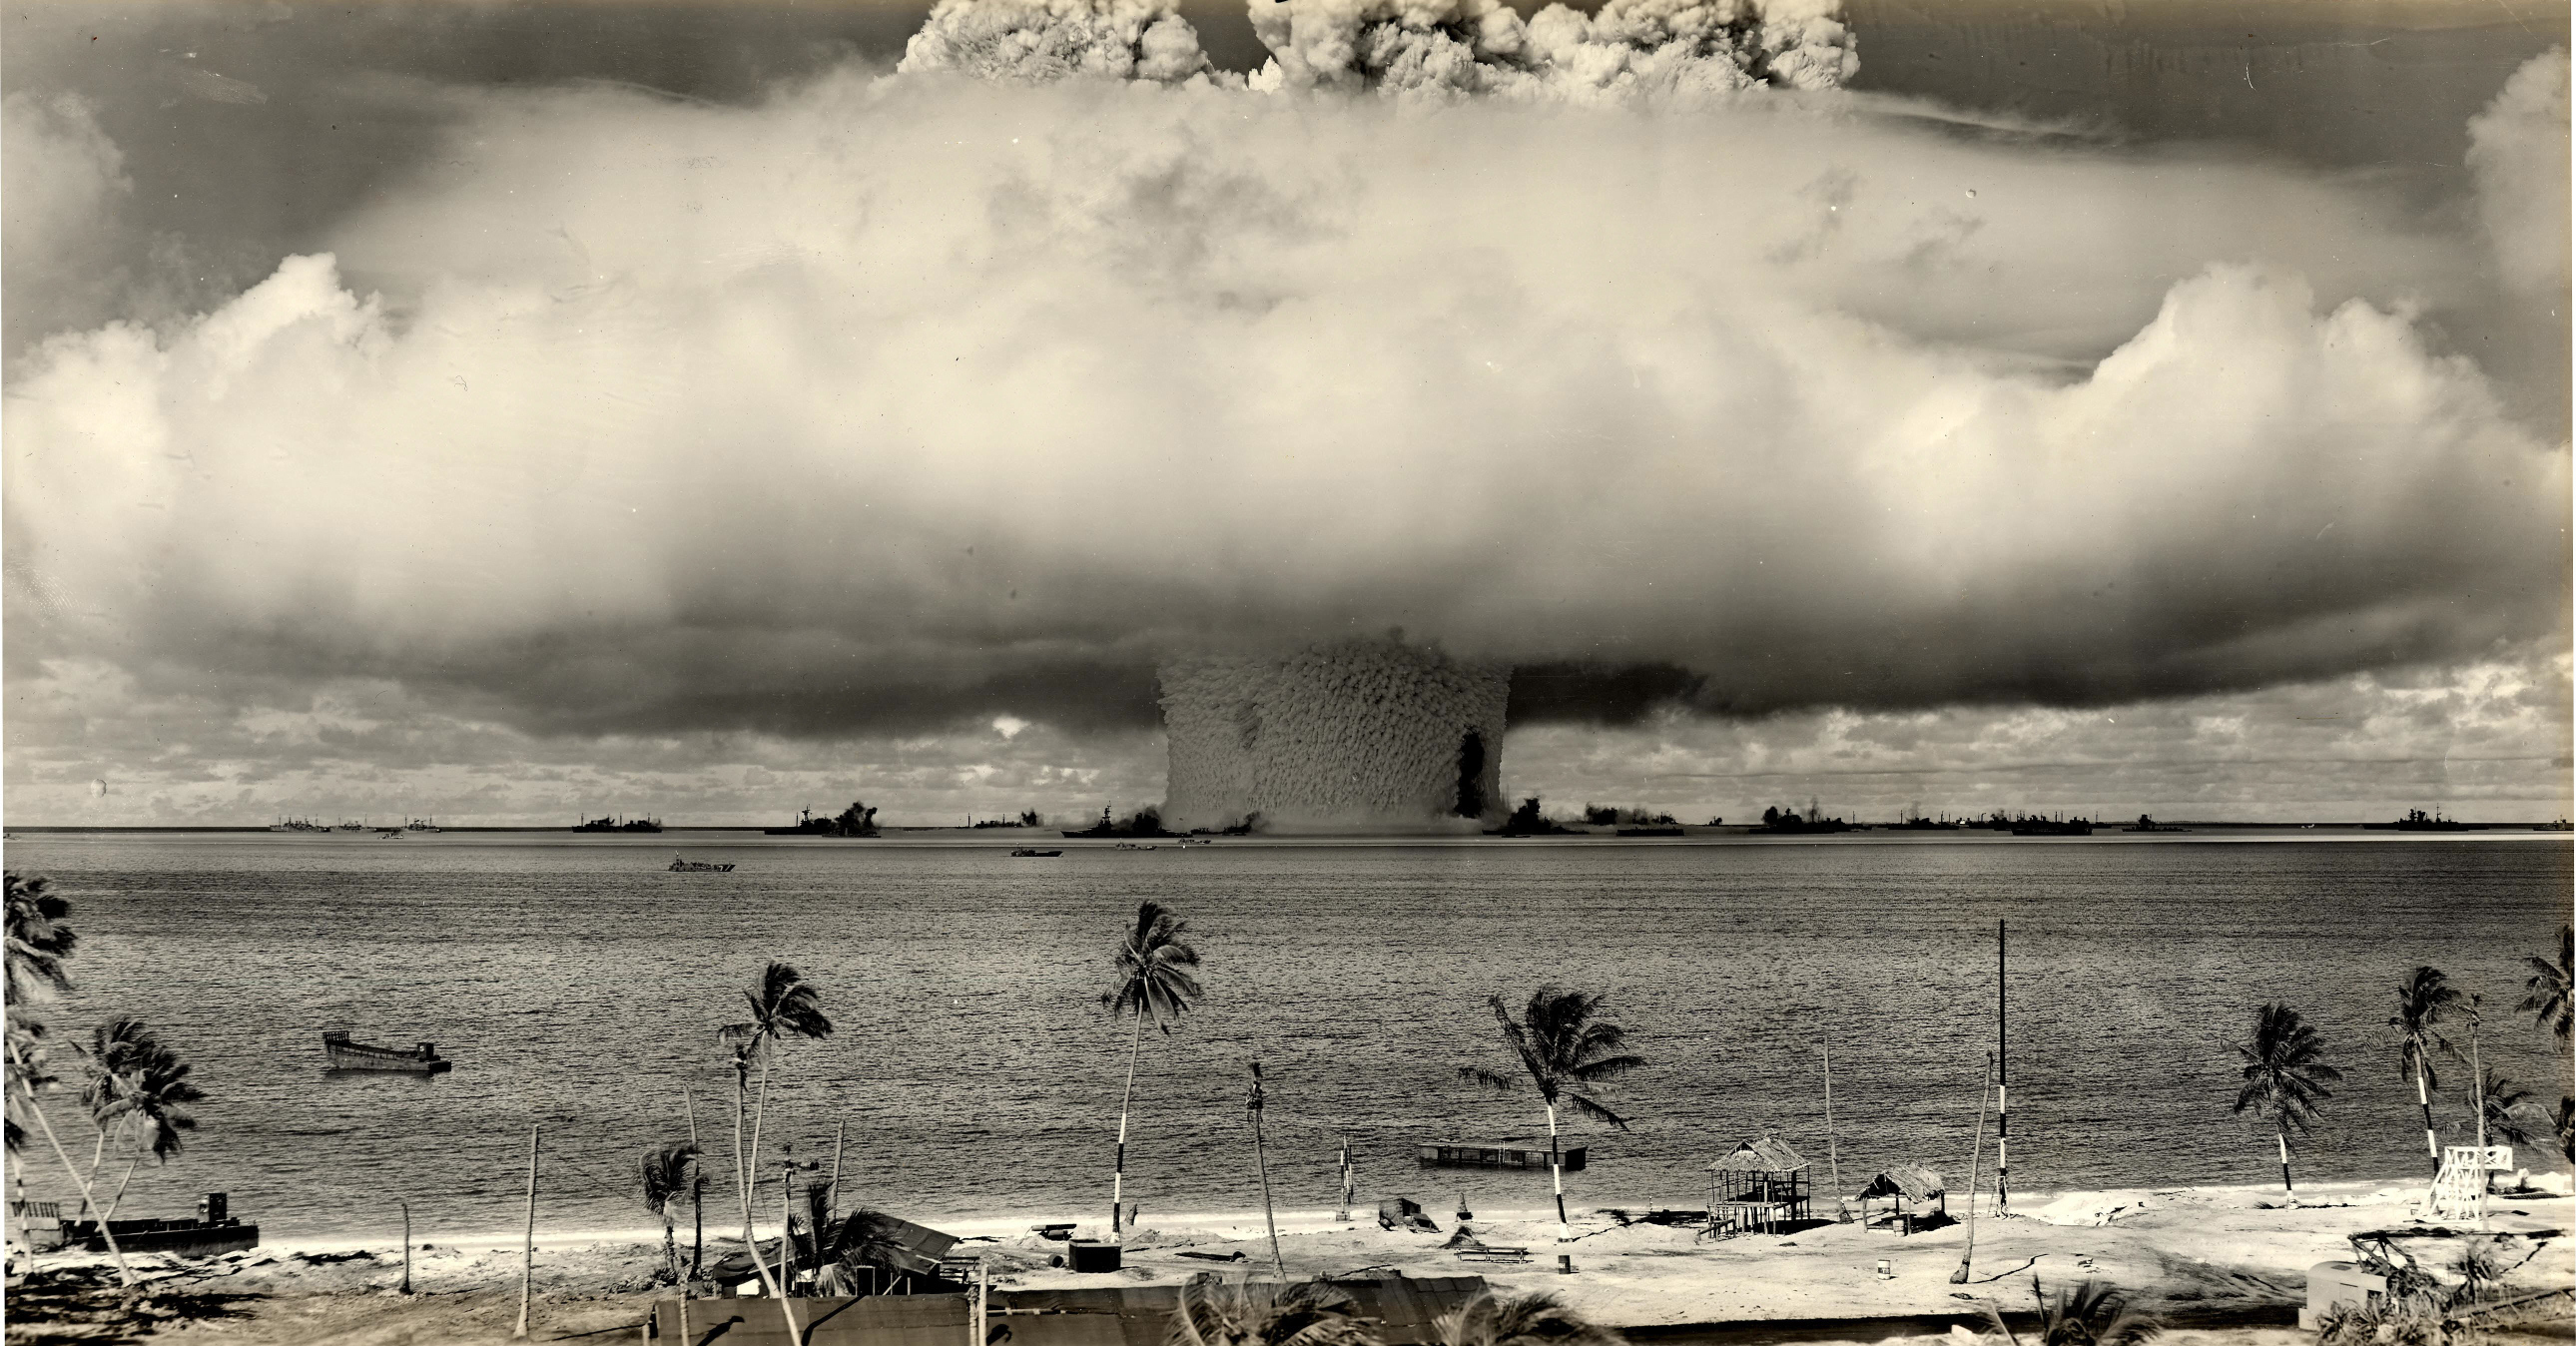 A black and white photo of an atomic bomb going off, published to: "Do I Need HTTPS For My Website? The Lasting Impacts of Security-ageddon"